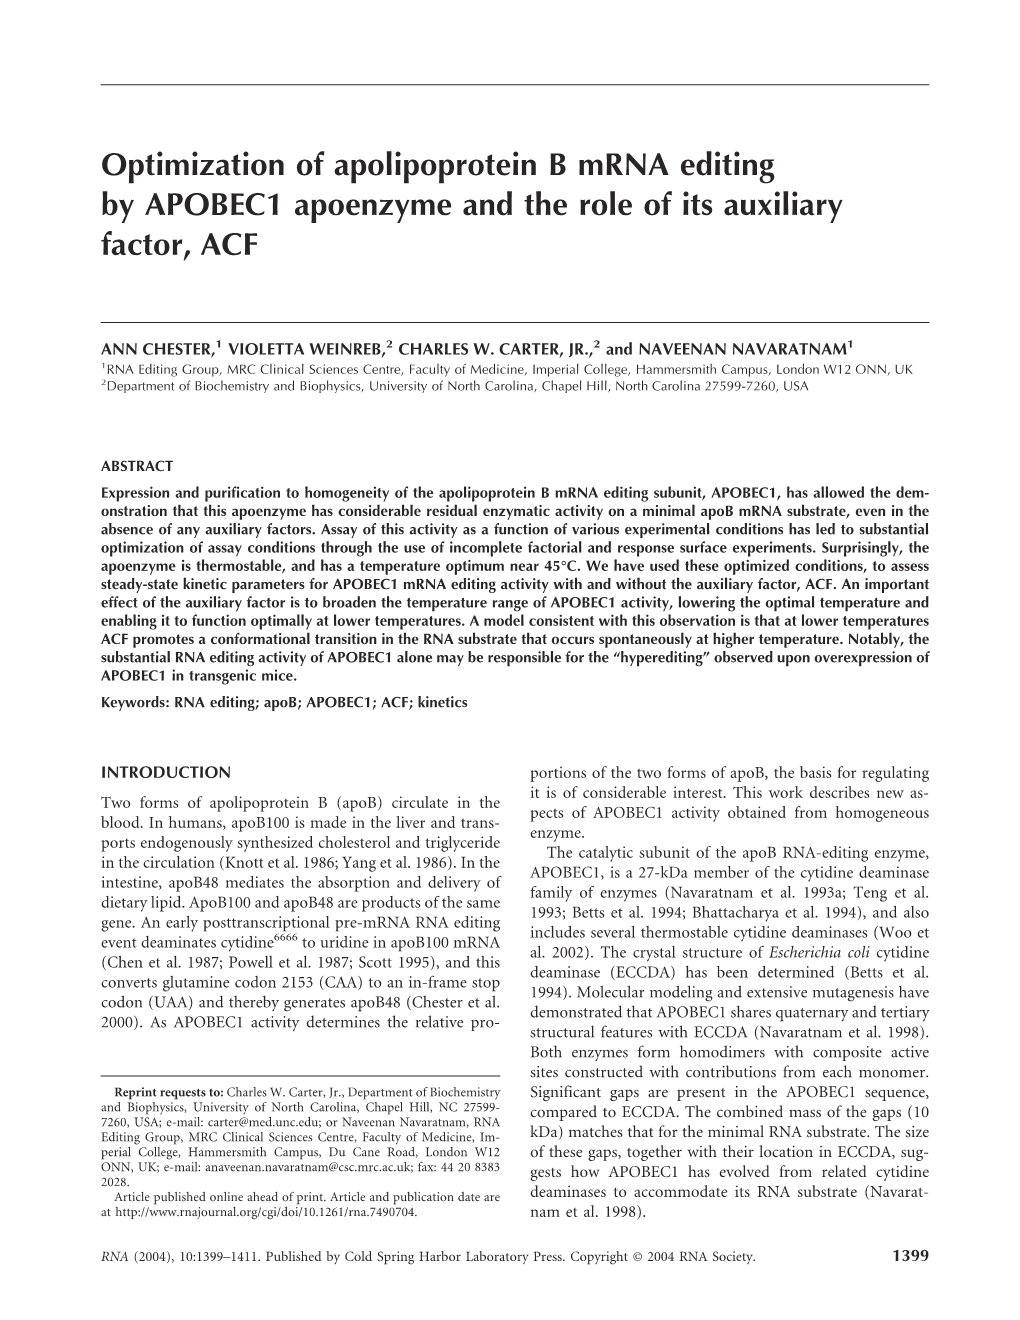 Optimization of Apolipoprotein B Mrna Editing by APOBEC1 Apoenzyme and the Role of Its Auxiliary Factor, ACF